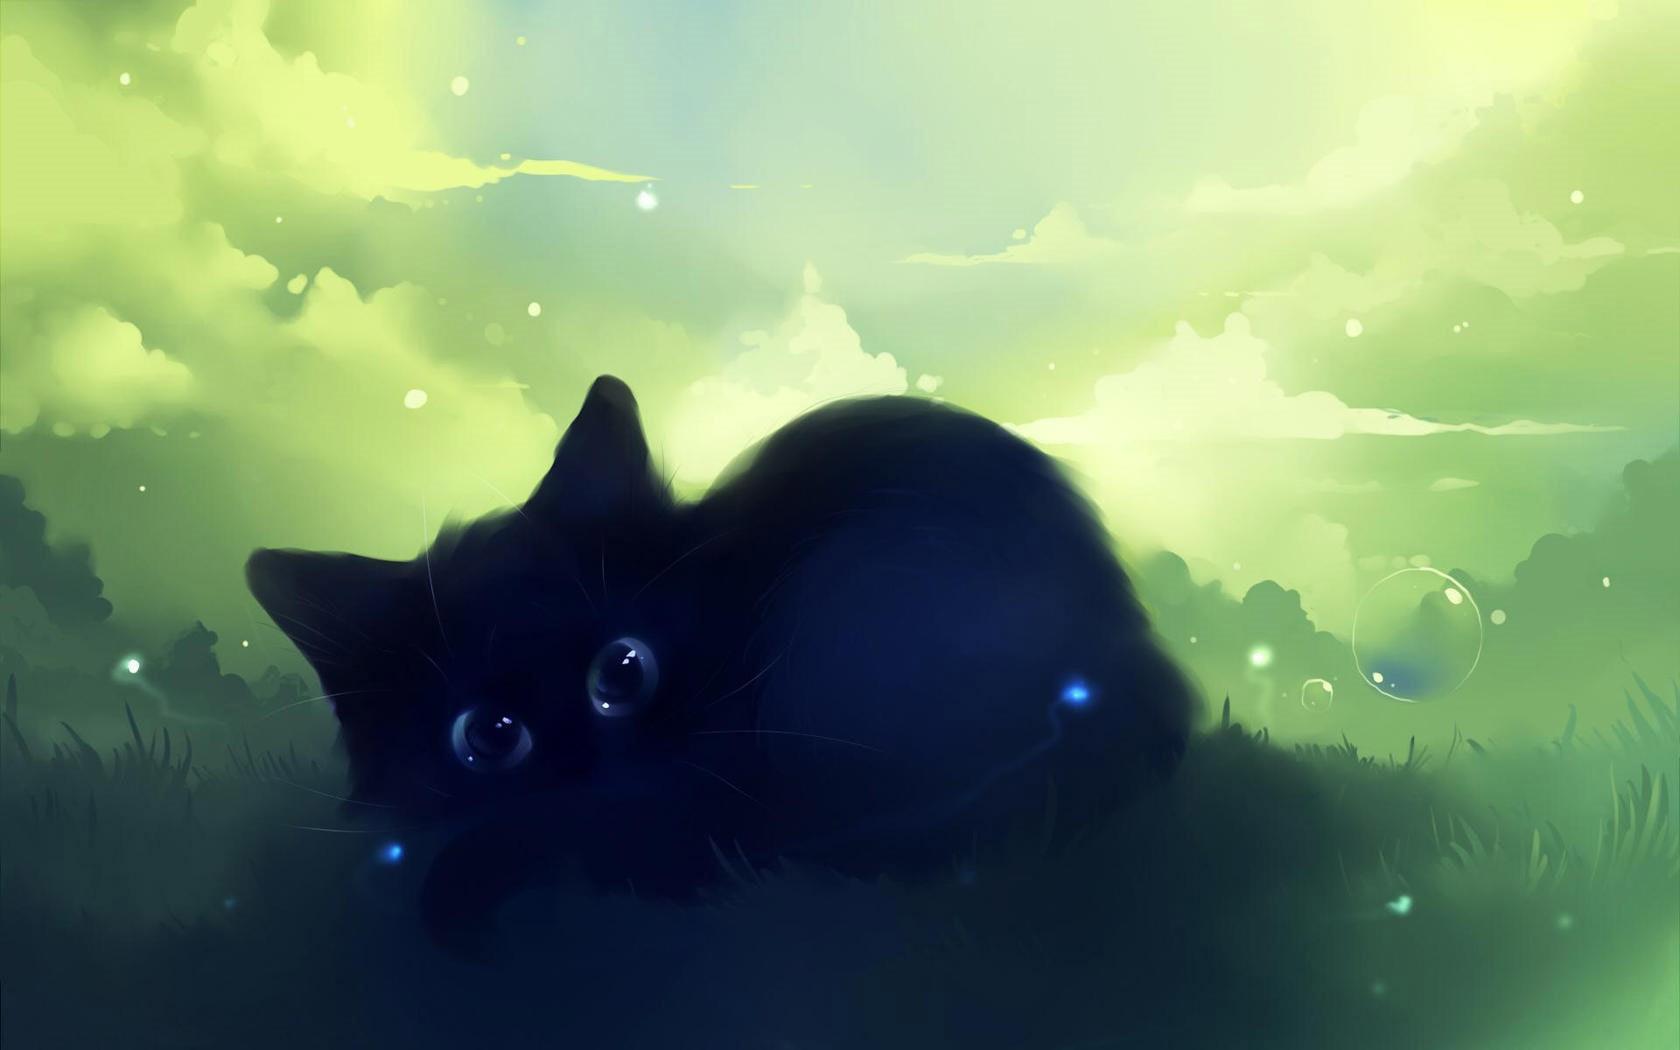 Cute Kitty Cat Anime Wallpapers Wallpaper Cave